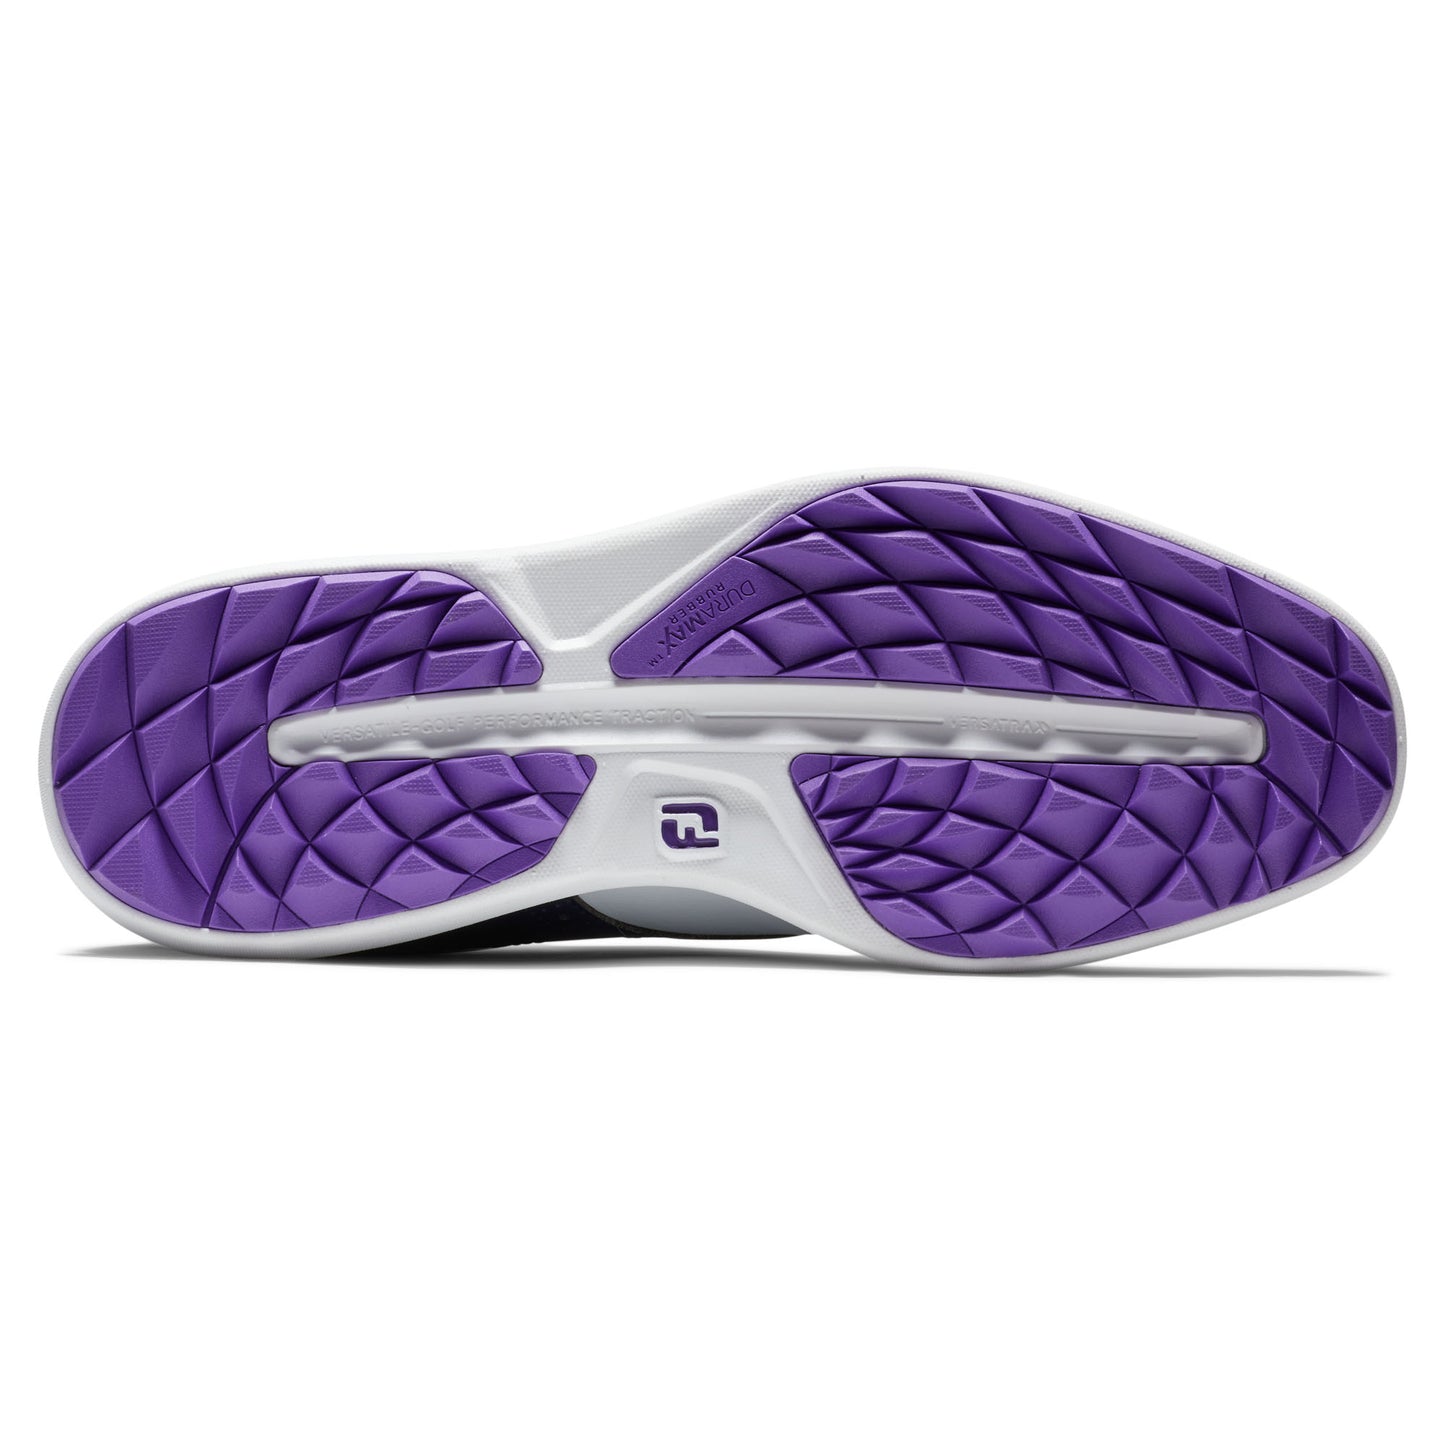 FootJoy Ladies Wide Fit Waterproof Spikeless Traditions Shoes in White, Navy & Purple